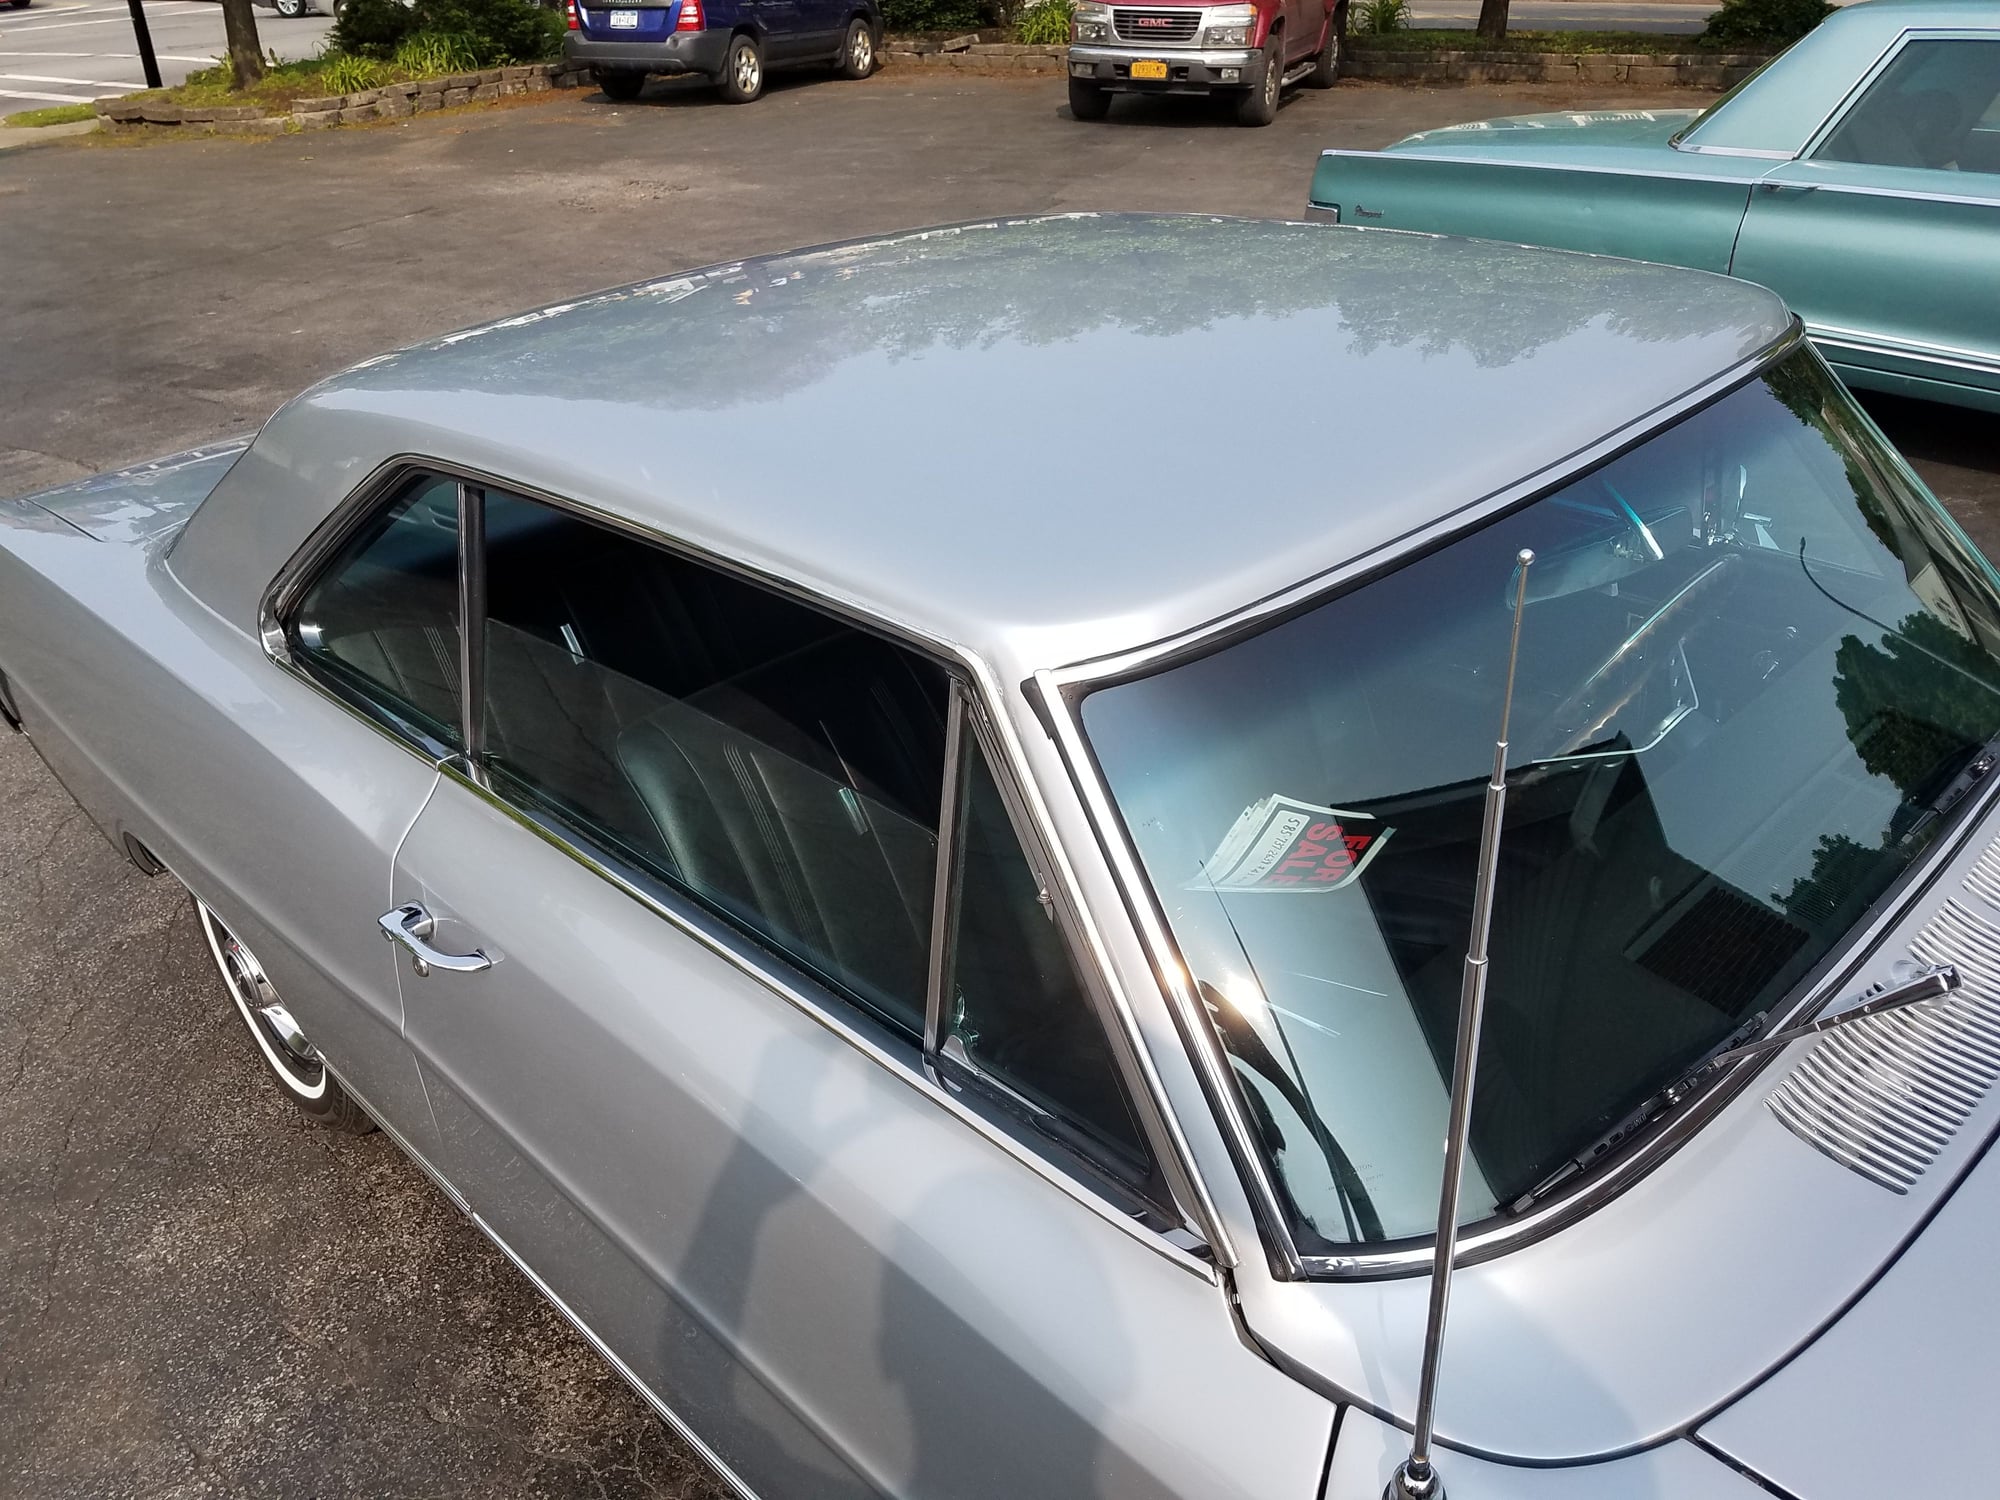 1966 Chevrolet Chevy II - 1966 Nova SS "L79 Clone" - Used - VIN 6611837NOR99209 - 75,839 Miles - 8 cyl - 2WD - Manual - Coupe - Silver - Rochester, NY 14609, United States